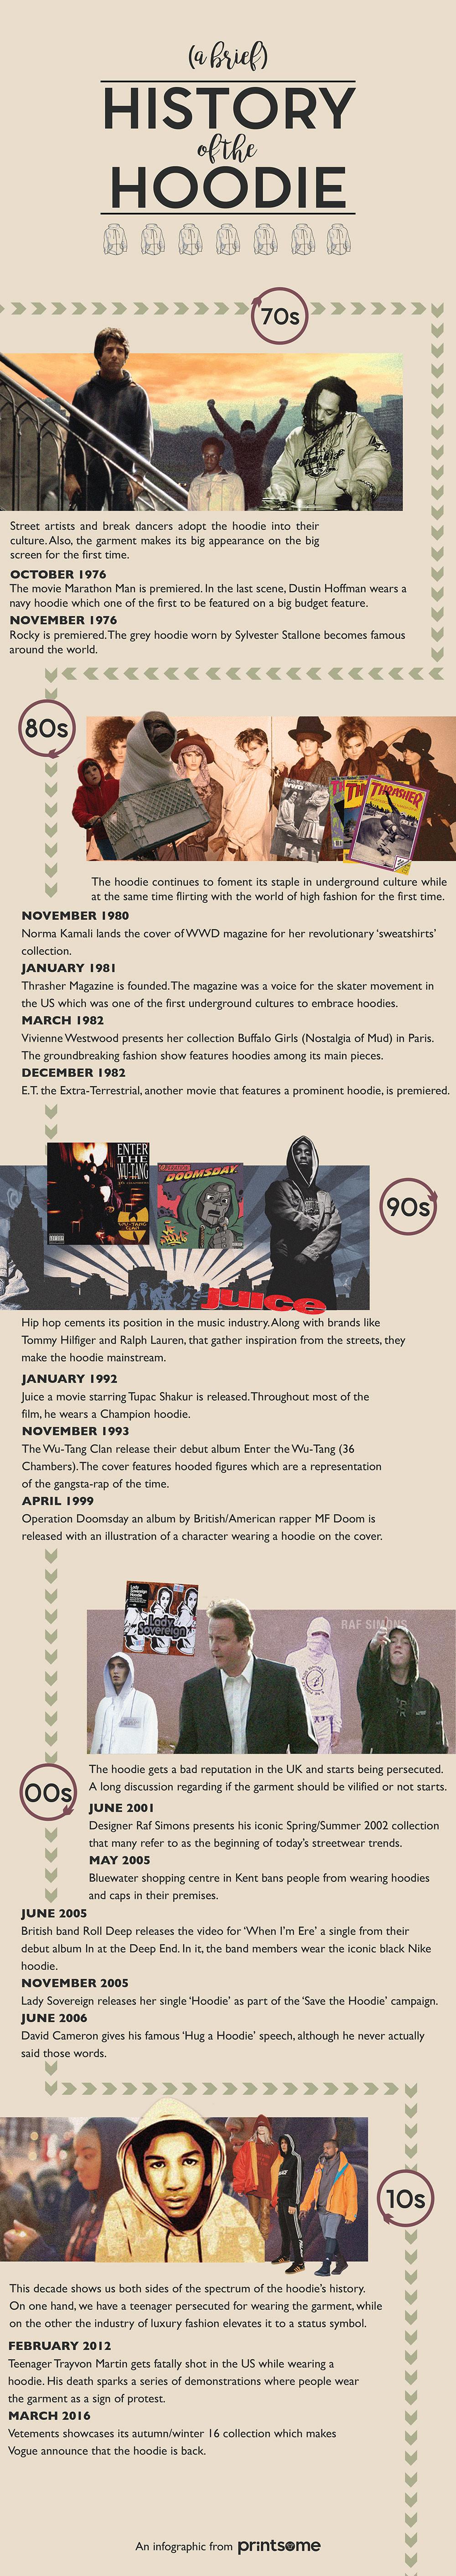 history of the hoodie infographic